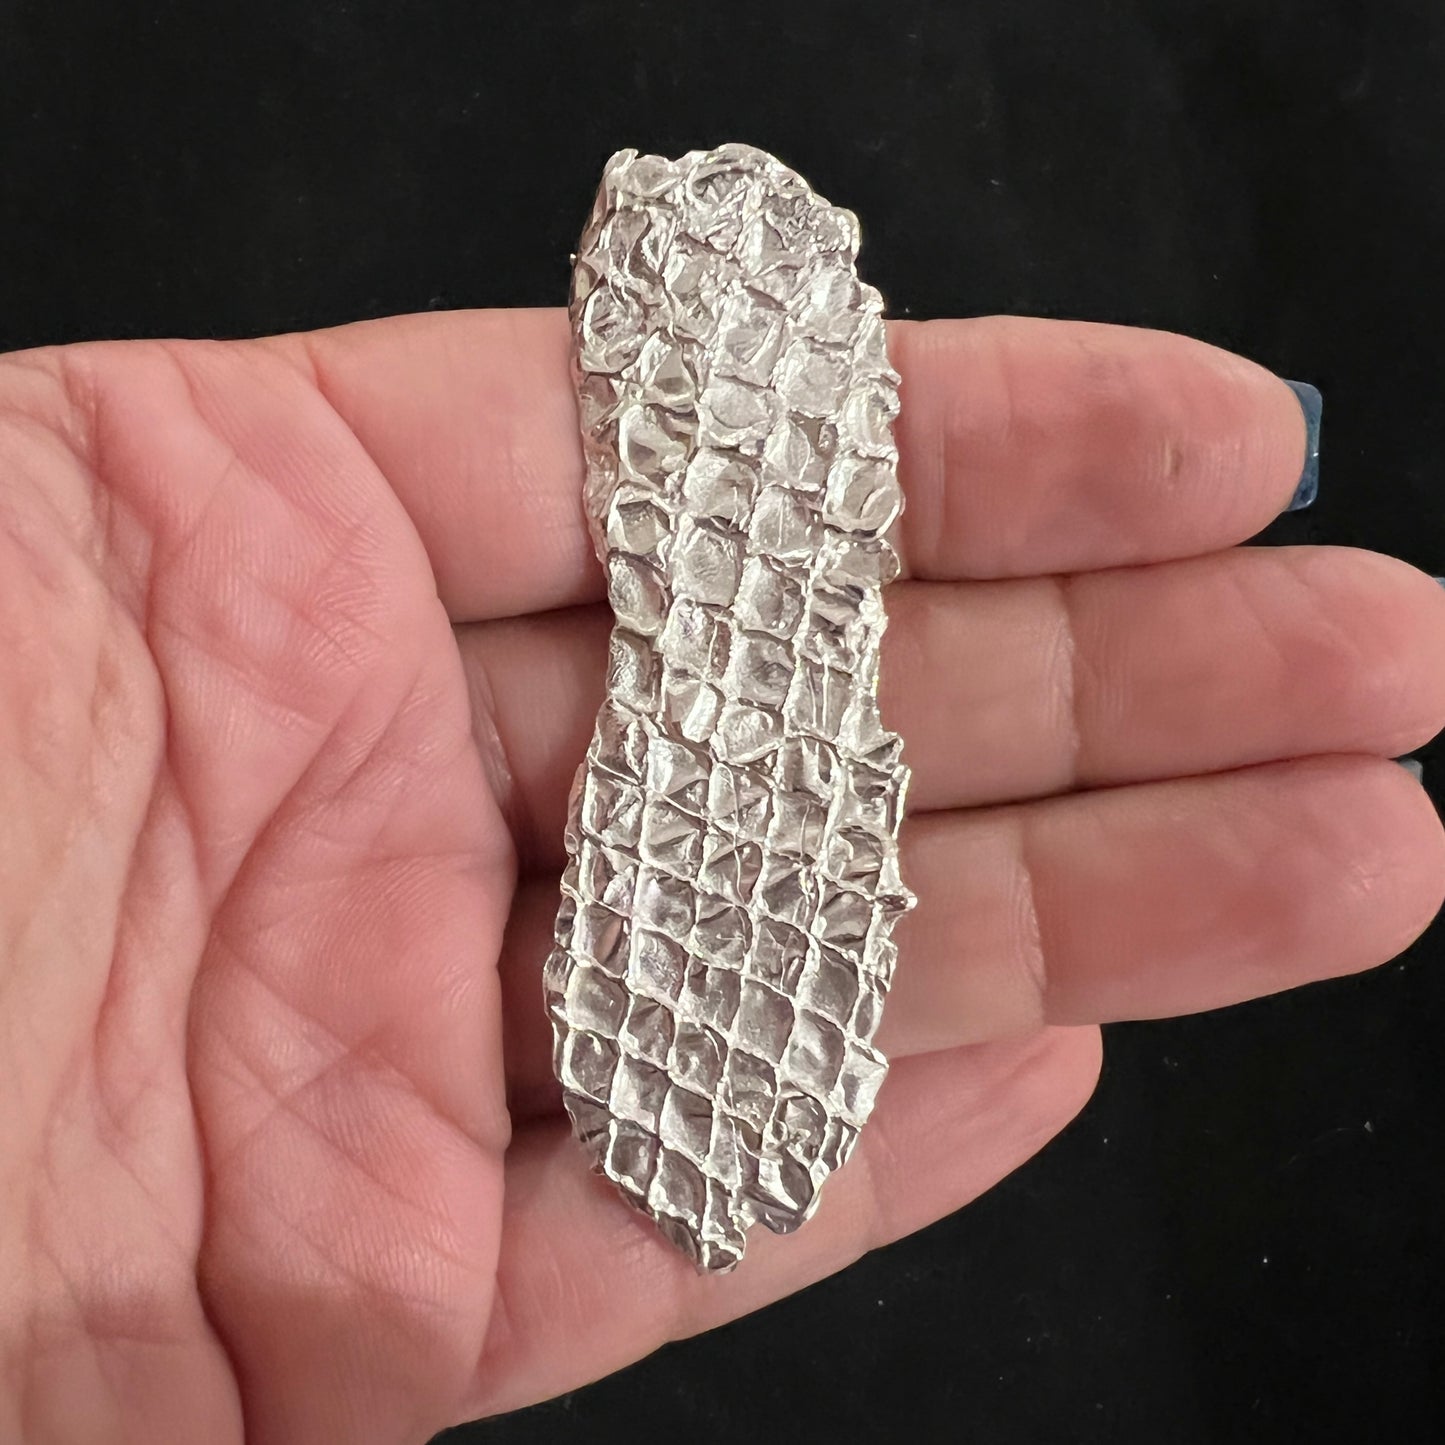 Snakeskin cast in Sterling Silver for Jewelry Design